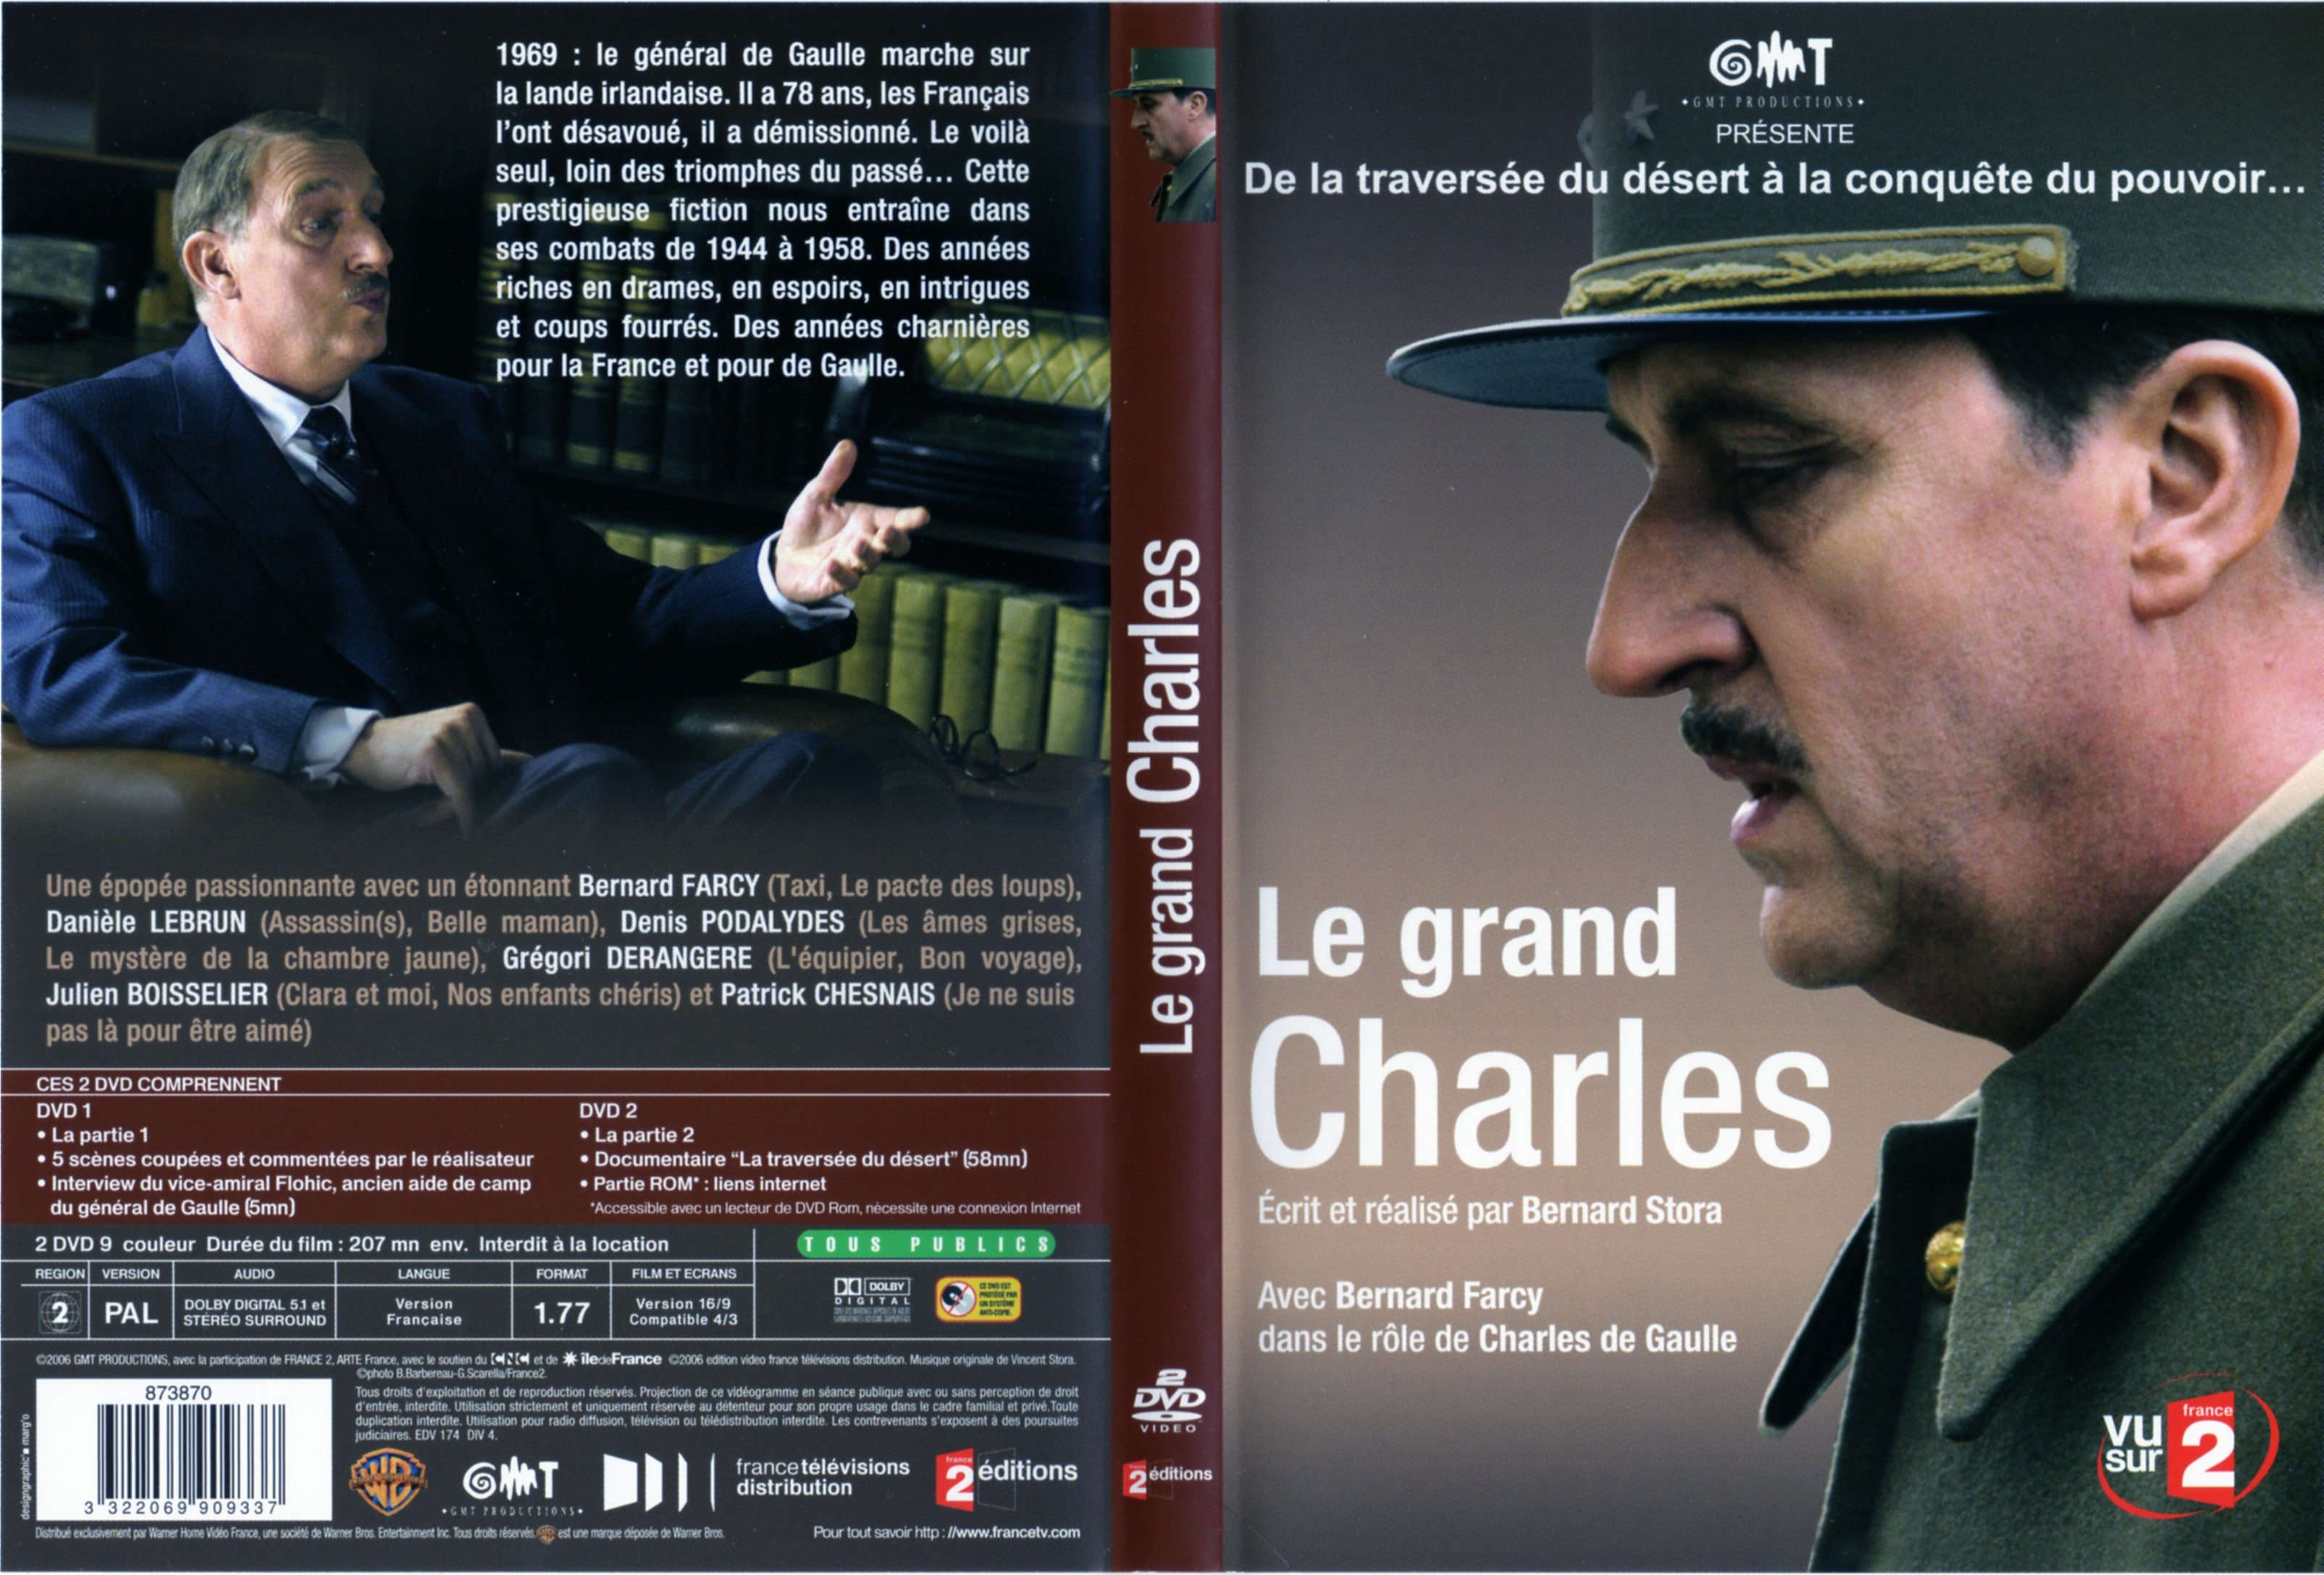 Jaquette DVD Le grand Charles